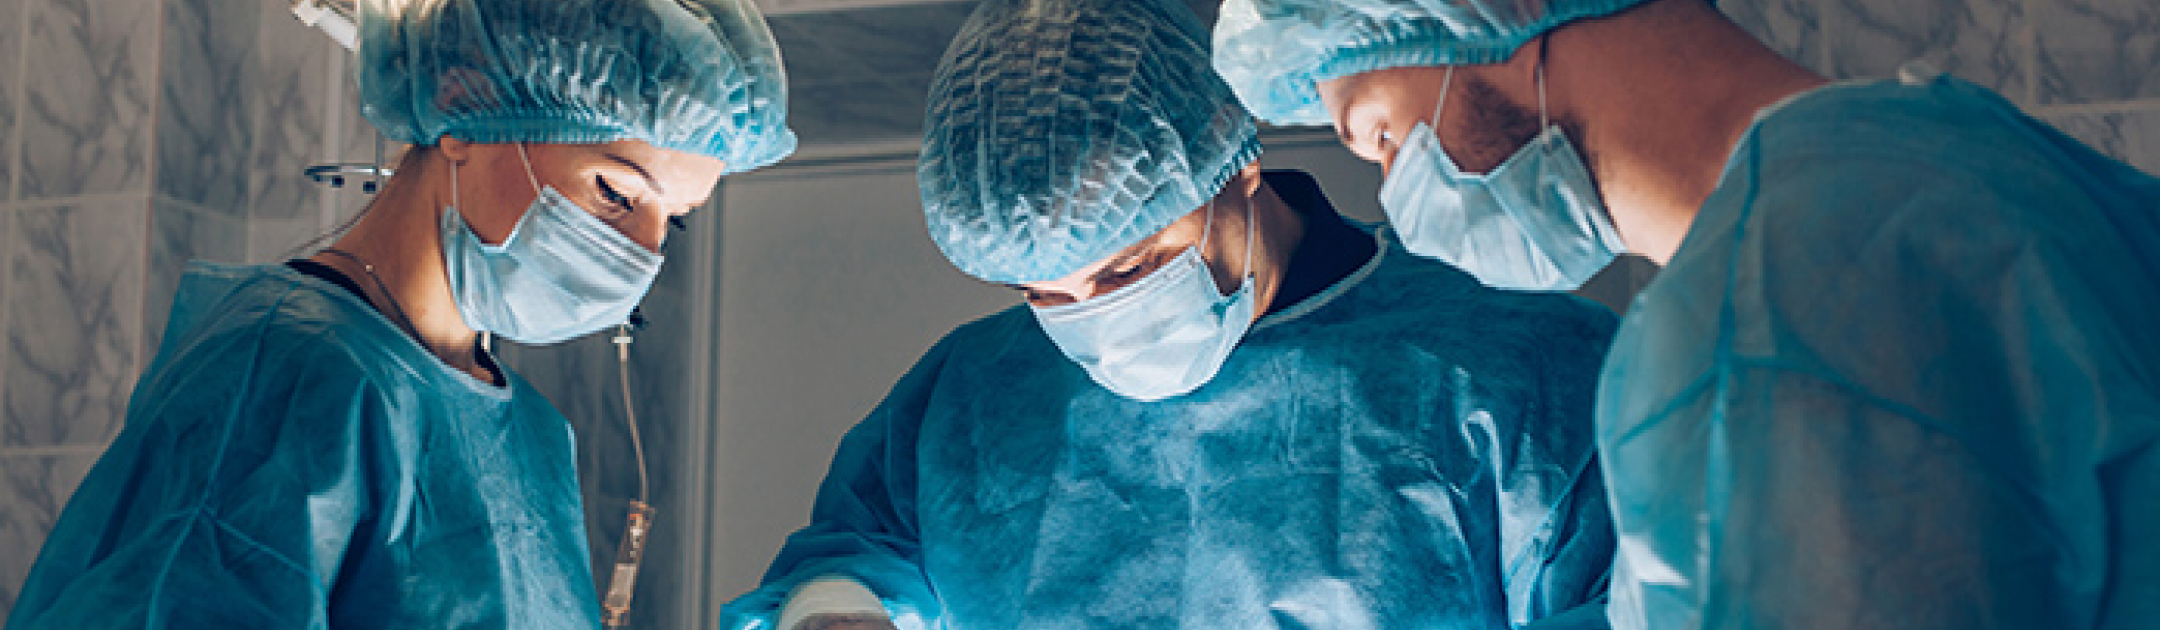 Three surgeons in an operating room